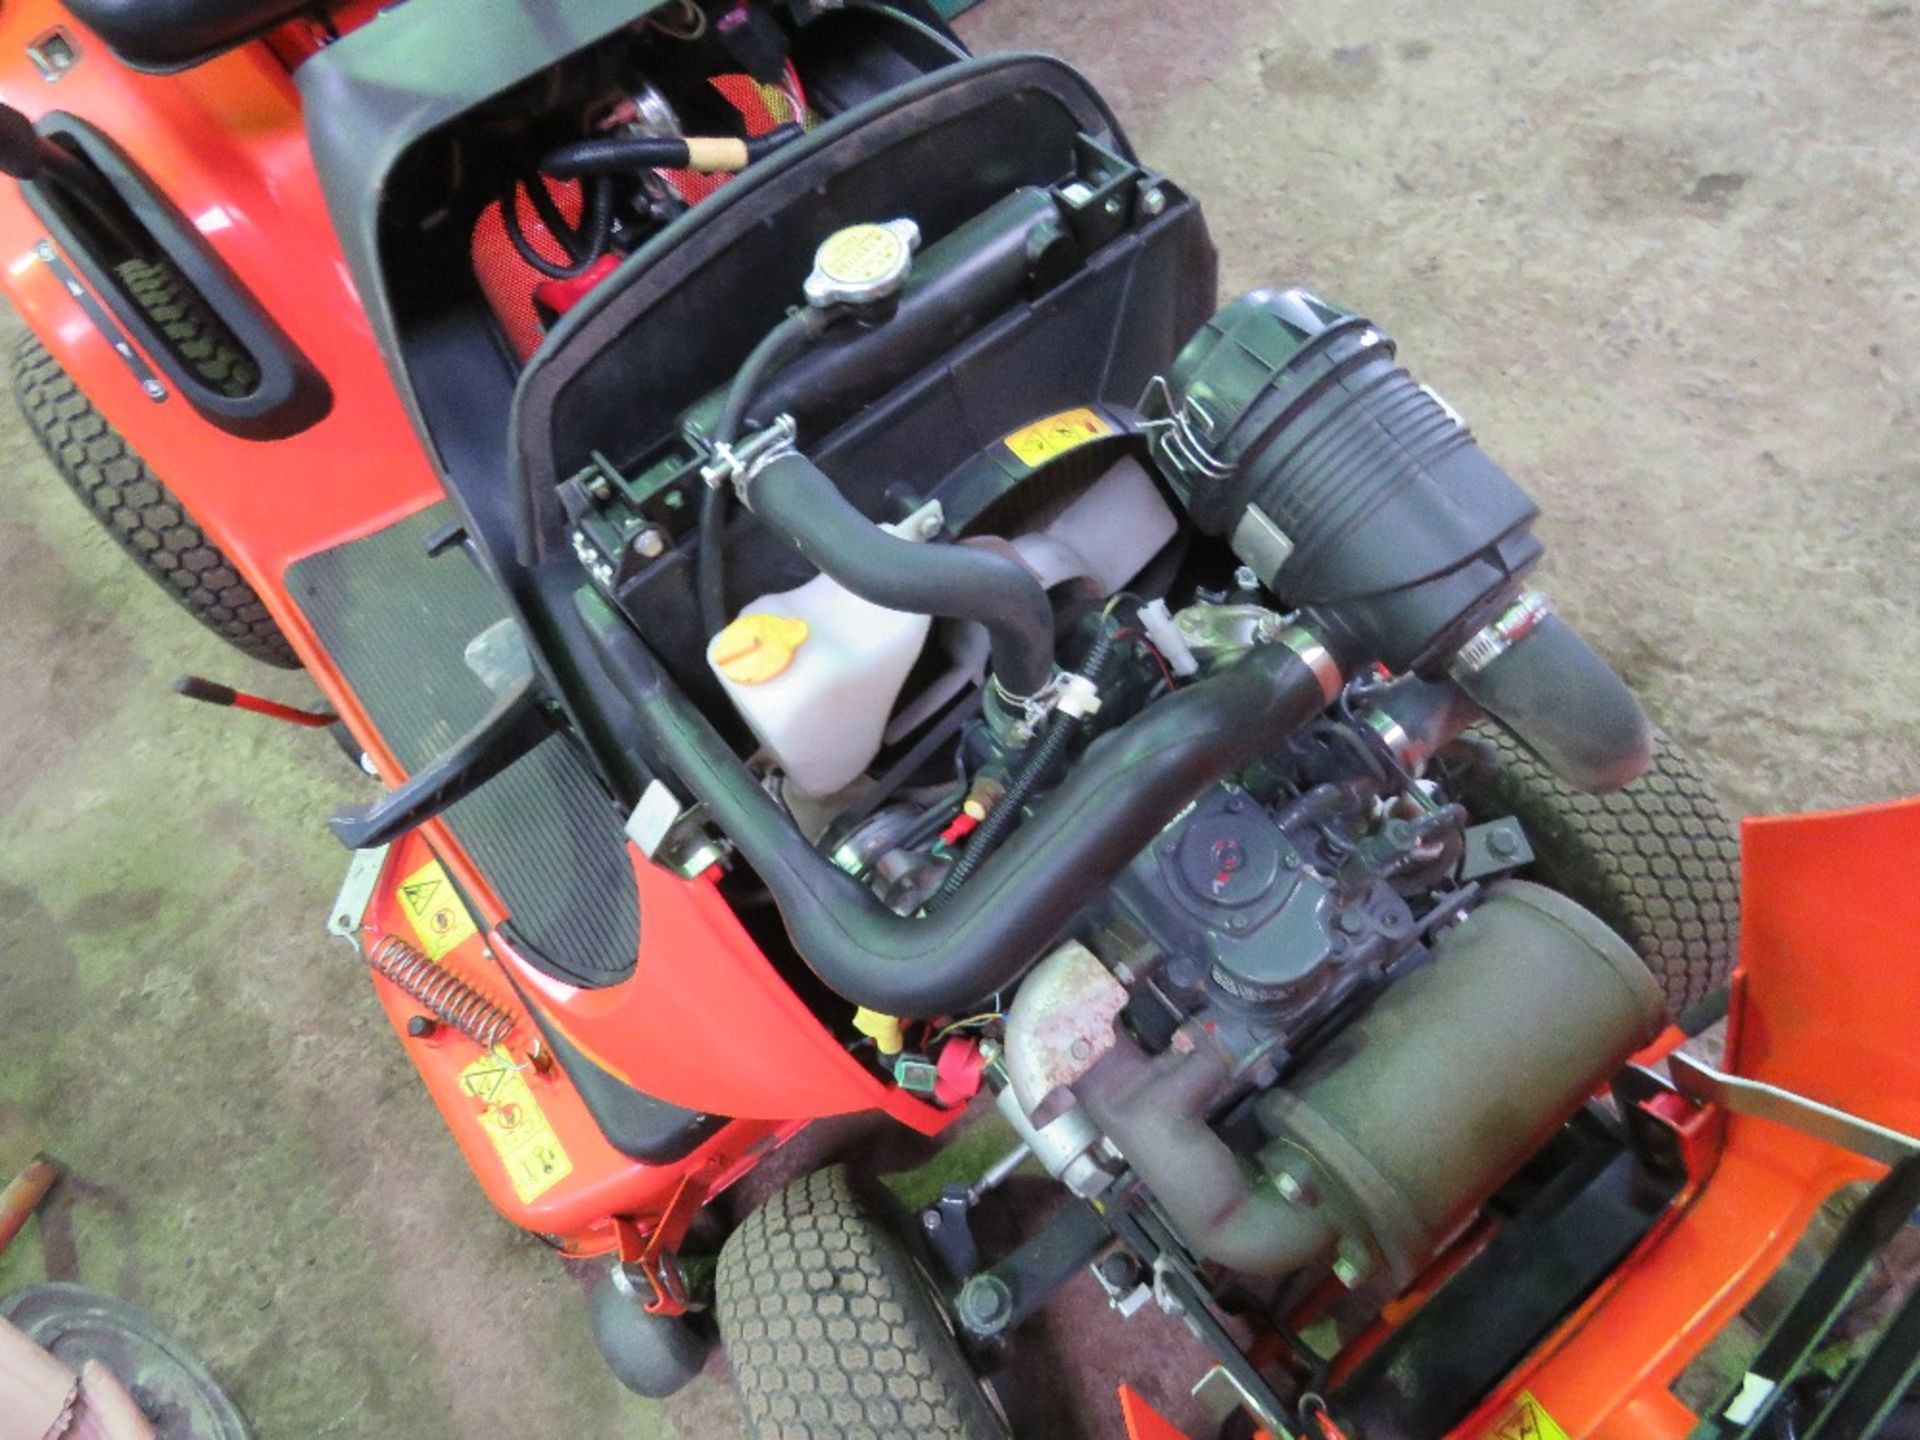 KUBOTA GR1600-II DIESEL RIDE ON MOWER WITH REAR COLLECTOR PLUS DISCHARGE CHUTE. SN:30142. WHEN TESTE - Image 6 of 9